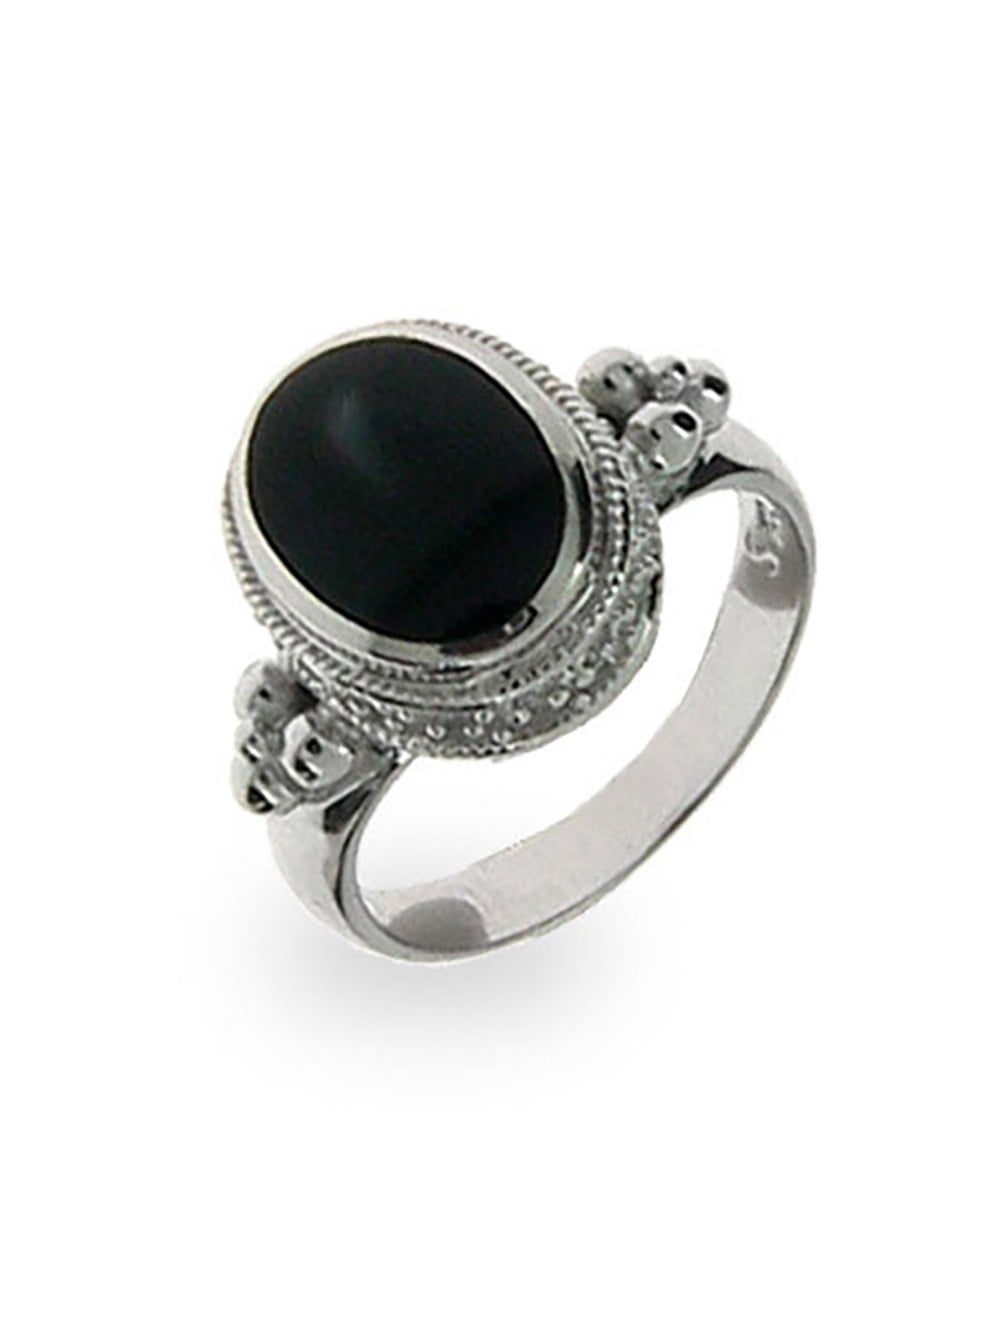 New 925 Sterling Silver and Black Onyx Ladies Small Celtic Ring sizes J-R 